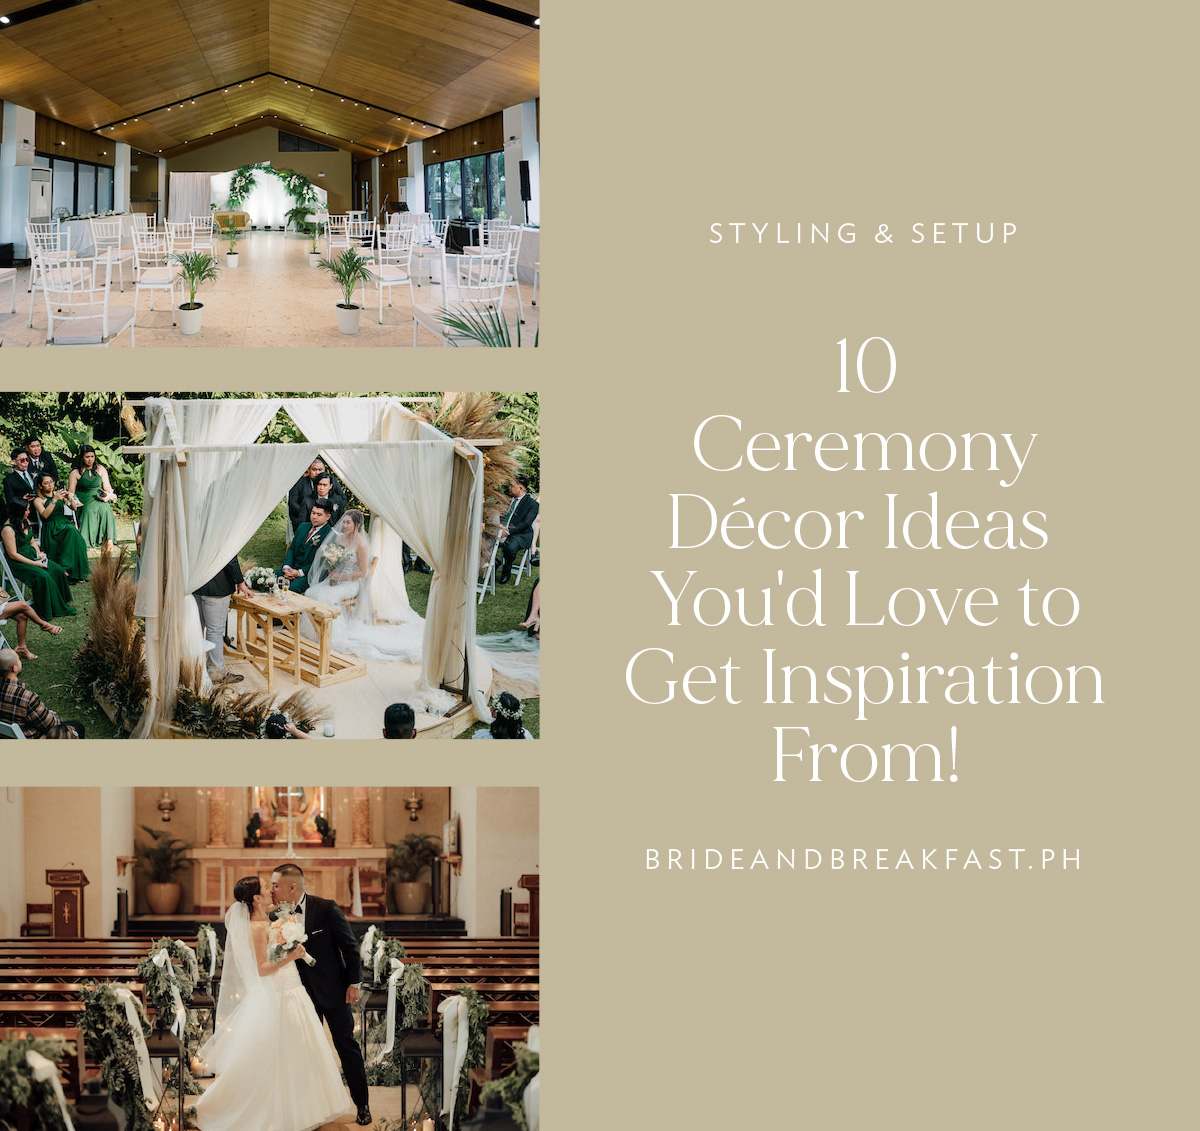 10 Ceremony Décor Ideas You'd Love to Get Inspiration From!